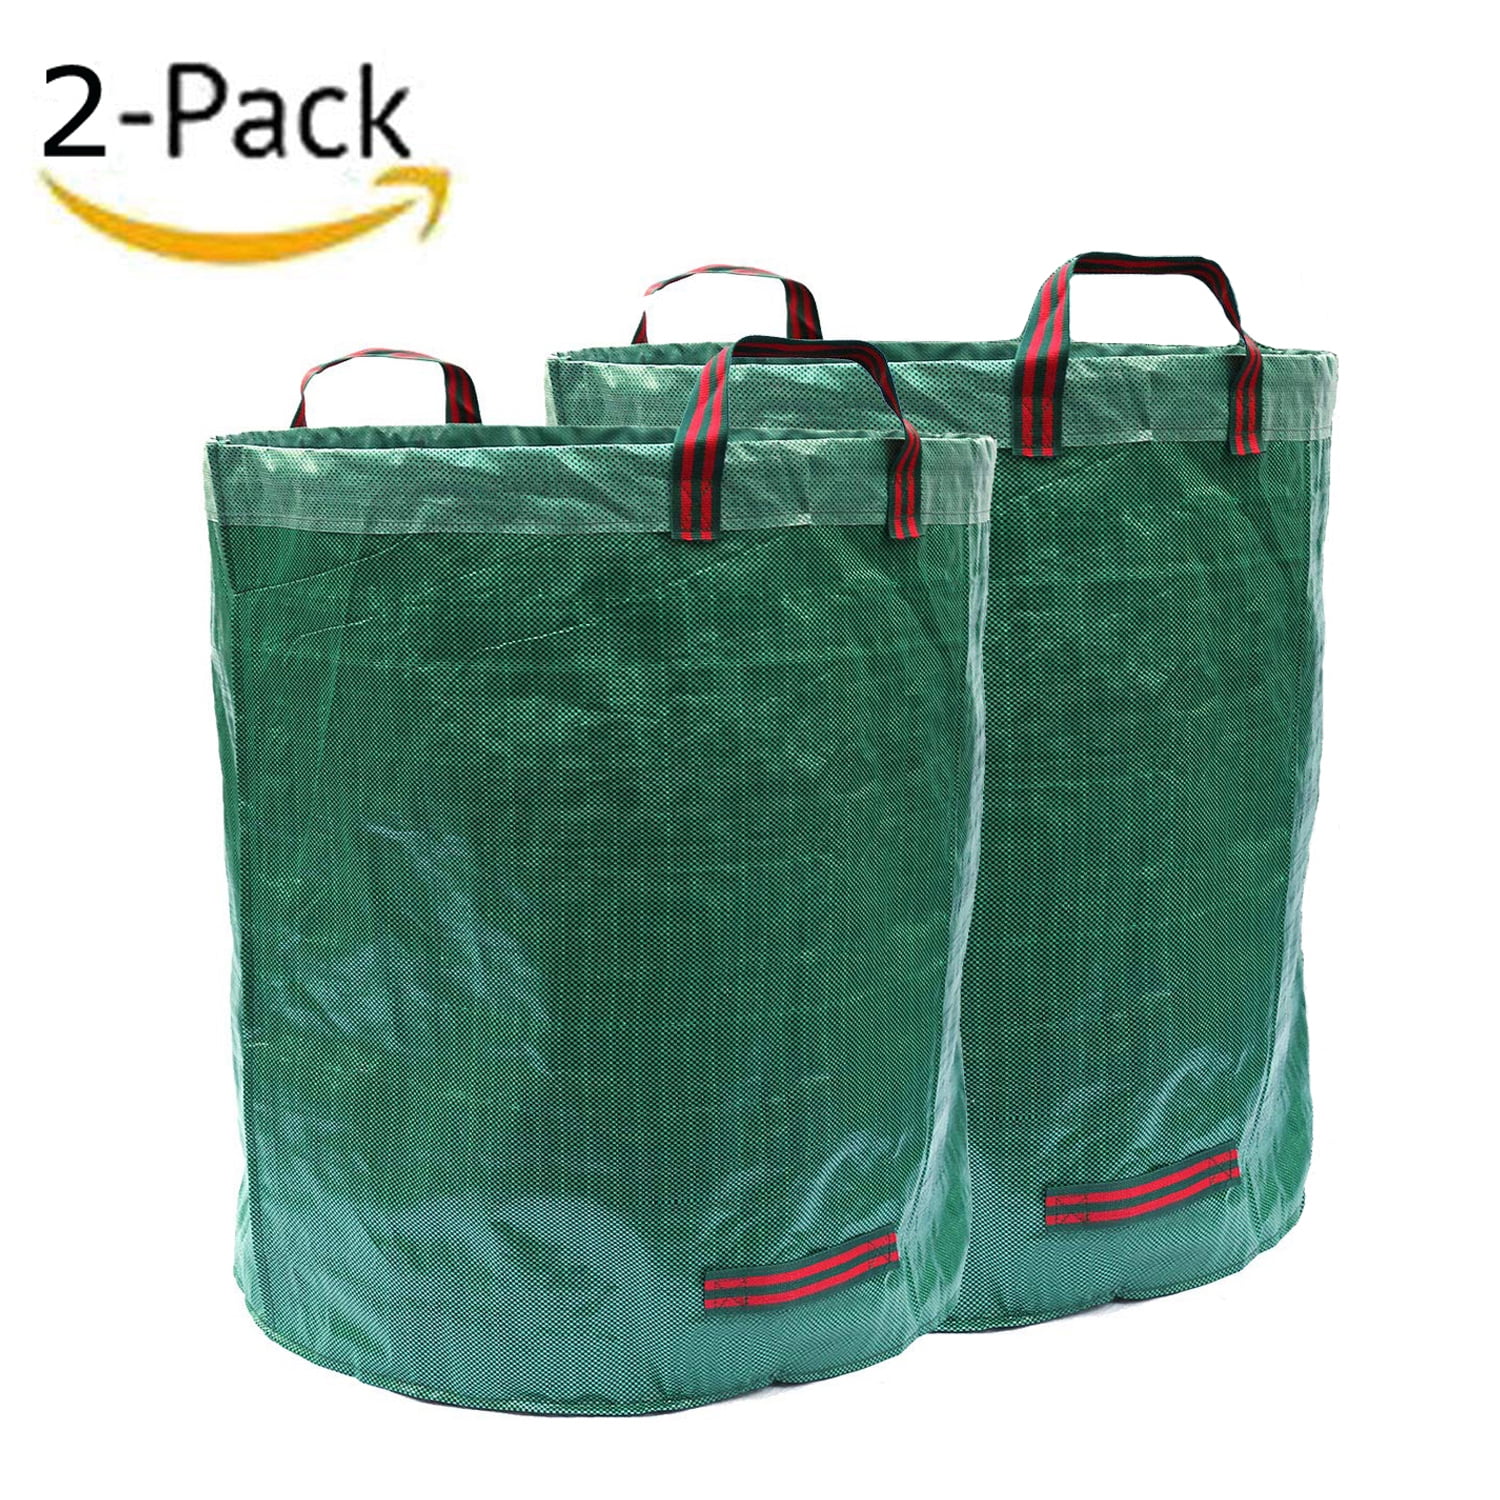 Yard Waste Bags H34, D34 inches GardenMate 5-Pack 132 Gallons Reusable Garden Waste Bags 